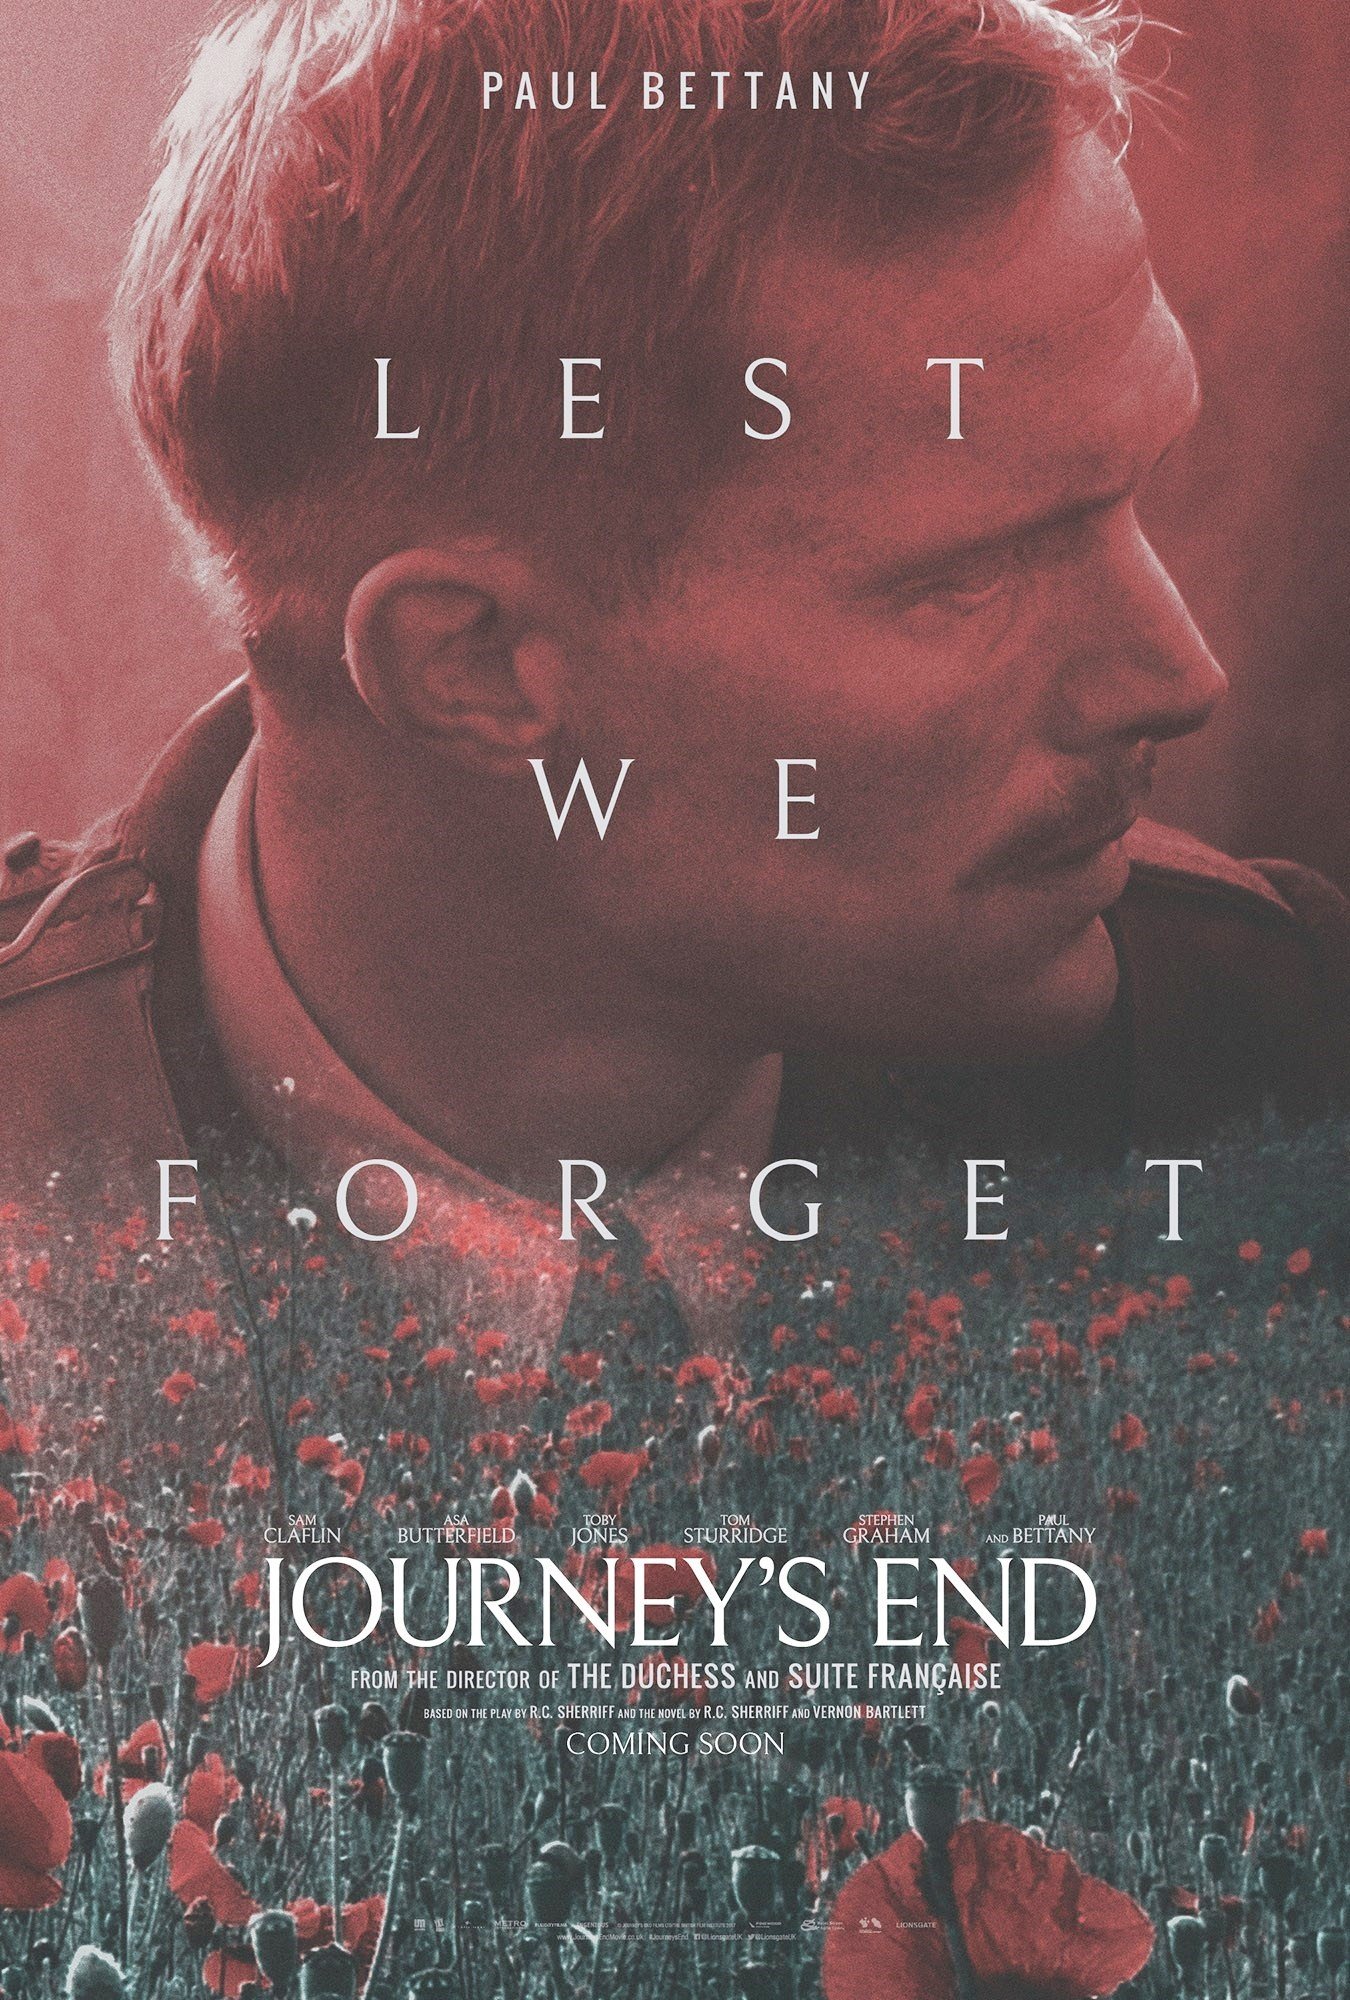 journey's end with 11 letters